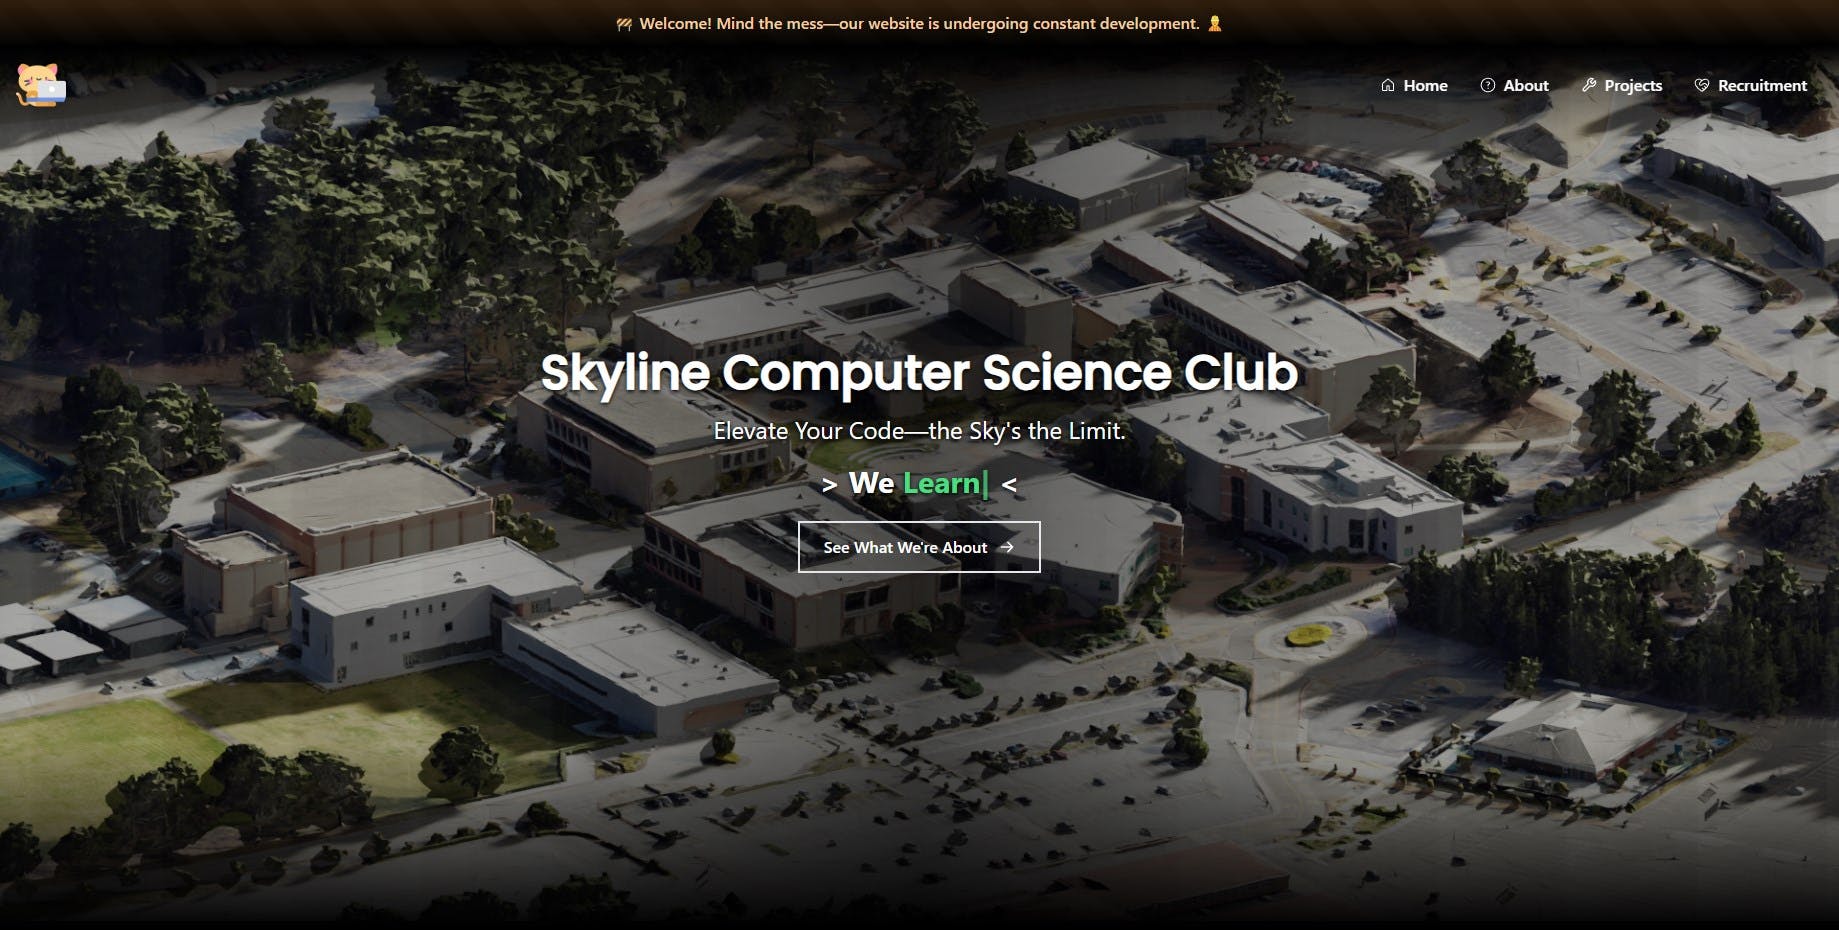 The Computer Science Club Website